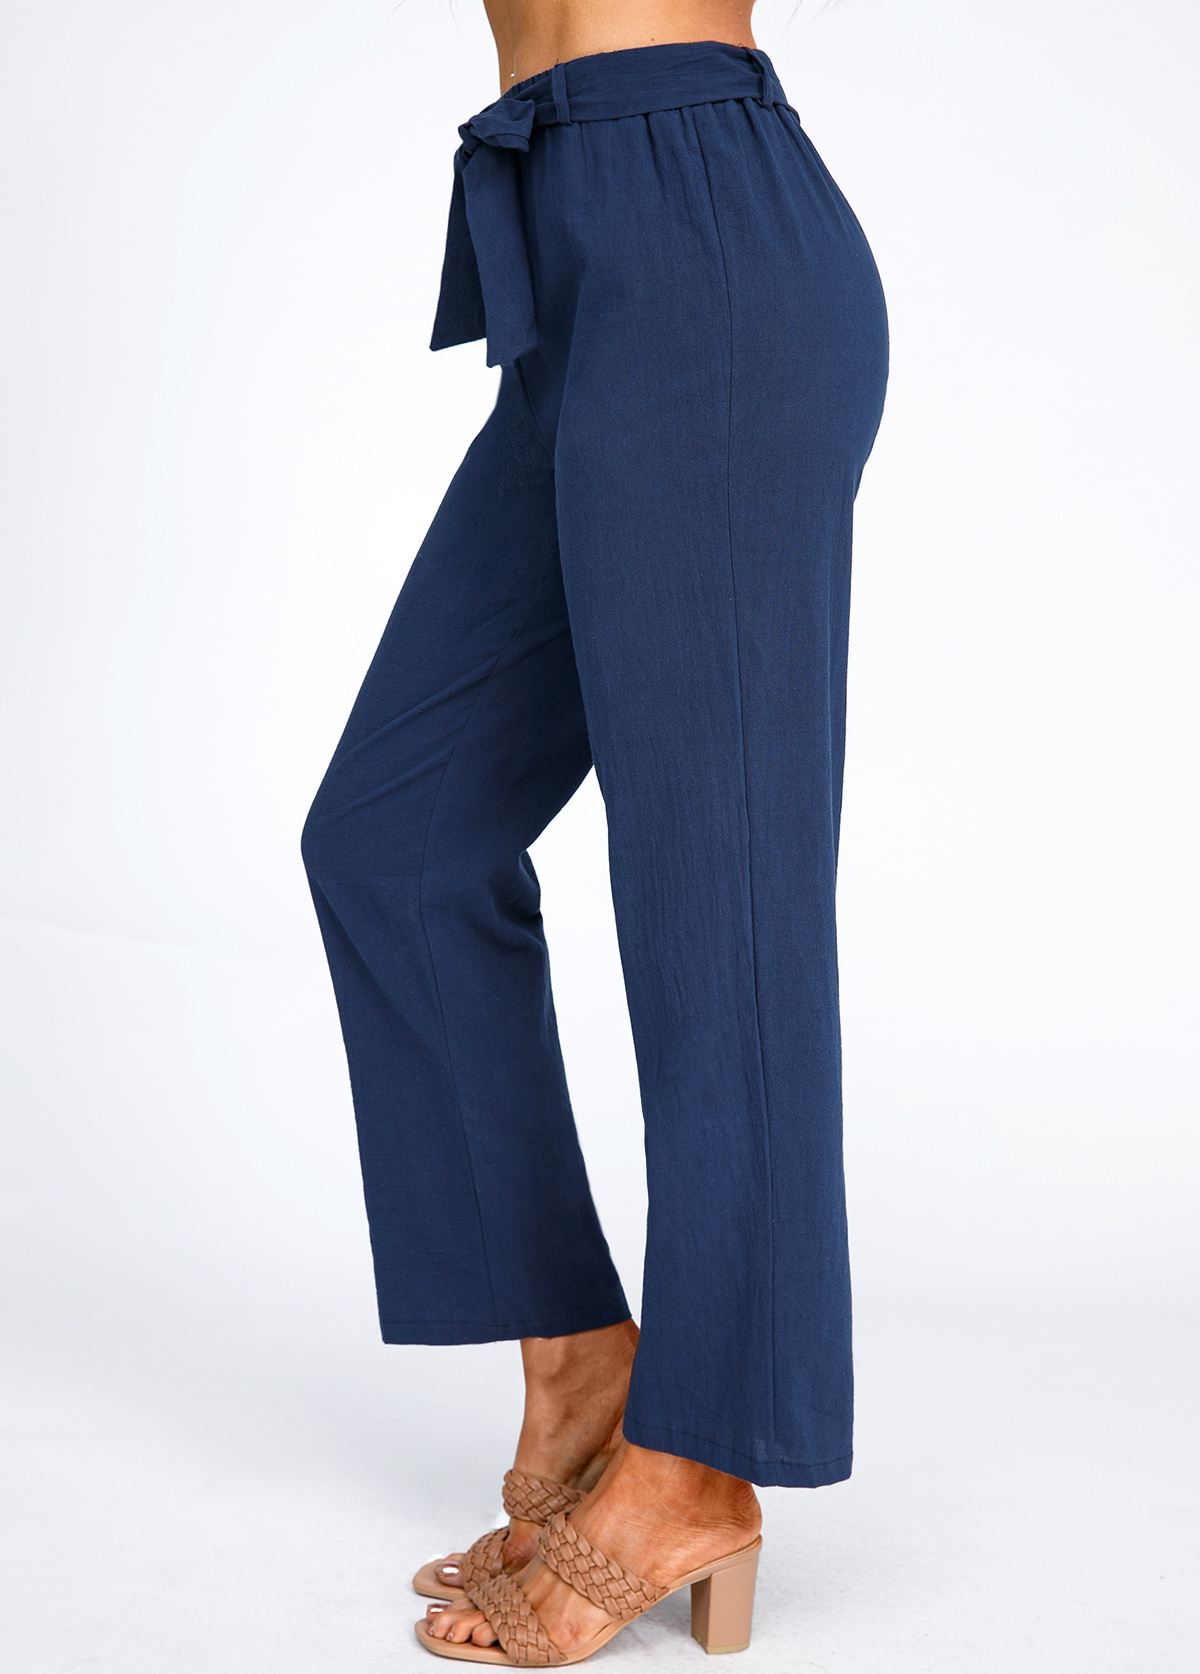 Bowknot Belted Navy High Waisted Pants